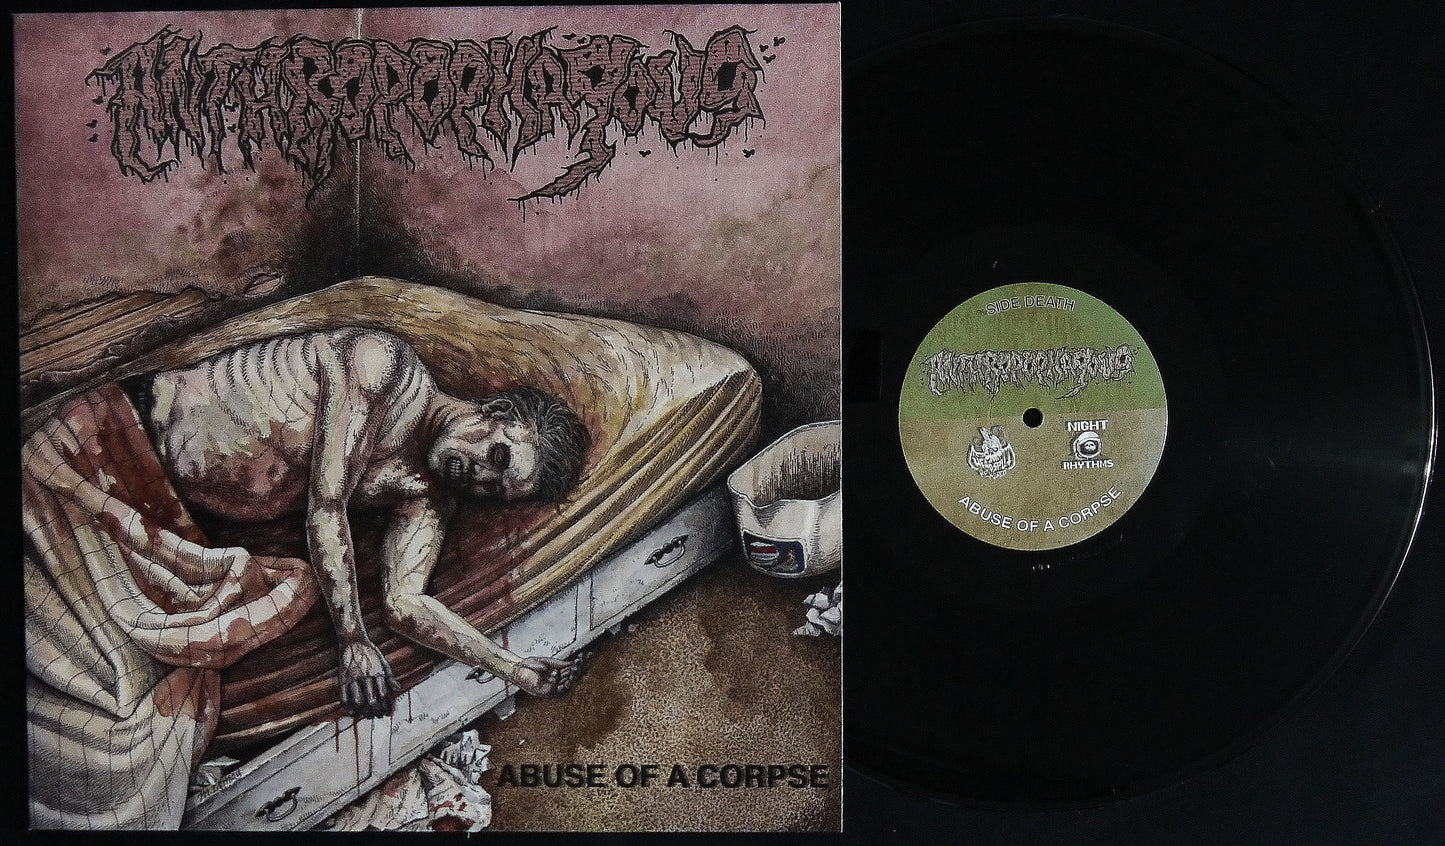 ANTHROPOPHAGOUS - Abuse Of A Corpse 12"